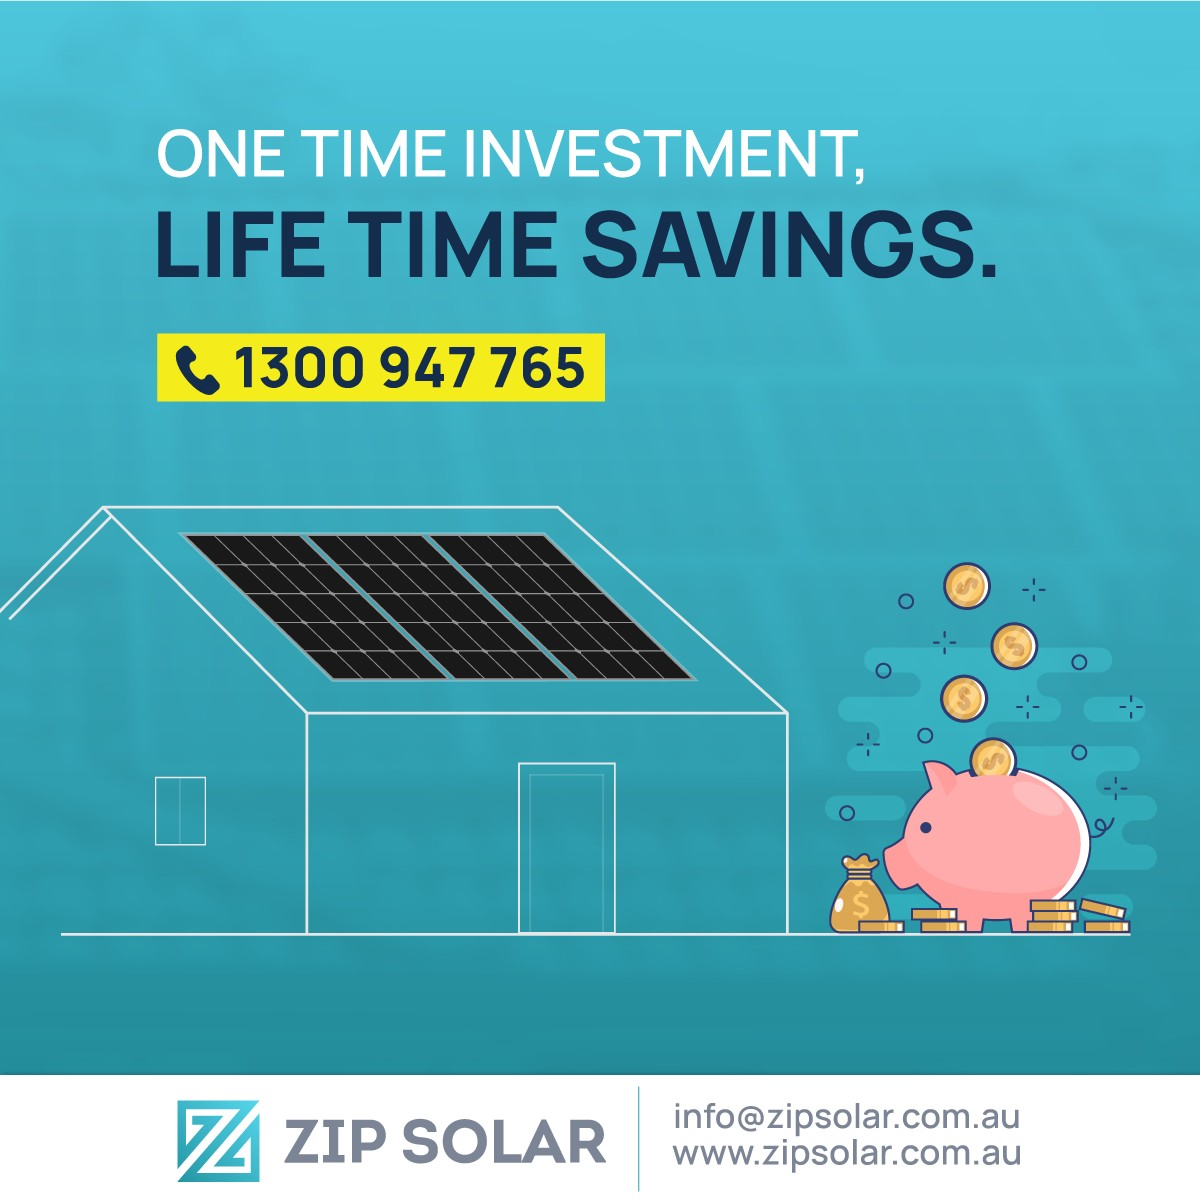 Invest once in solar and enjoy the lifelong savings